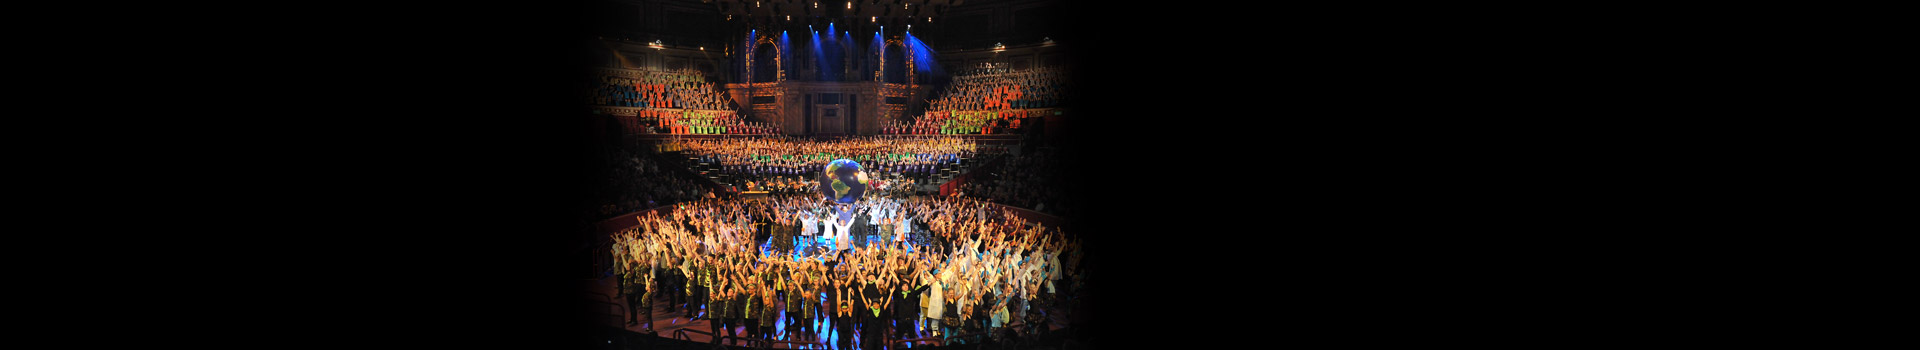 How To Make A Hero tickets at the Royal Albert Hall